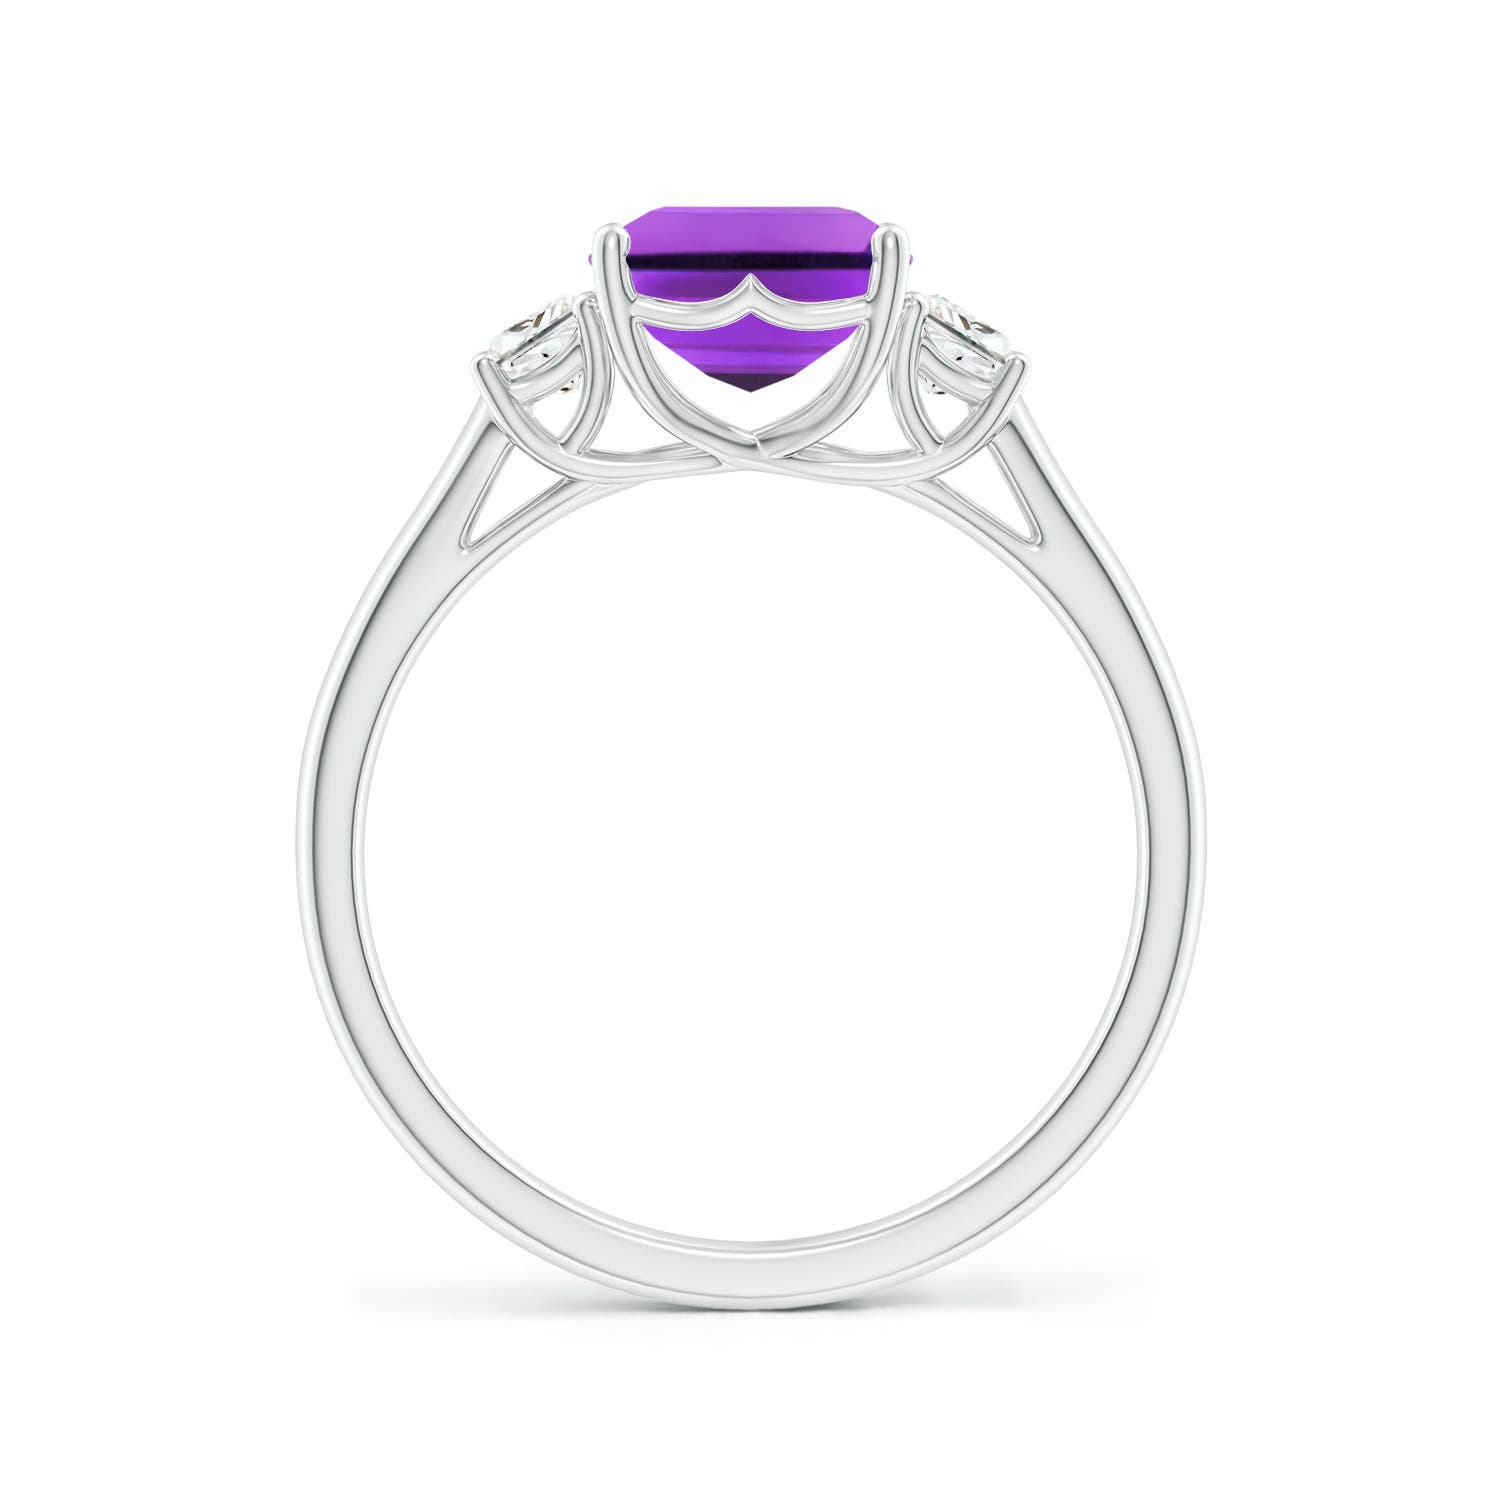 AAA- Amethyst / 2.52 CT / 14 KT White Gold